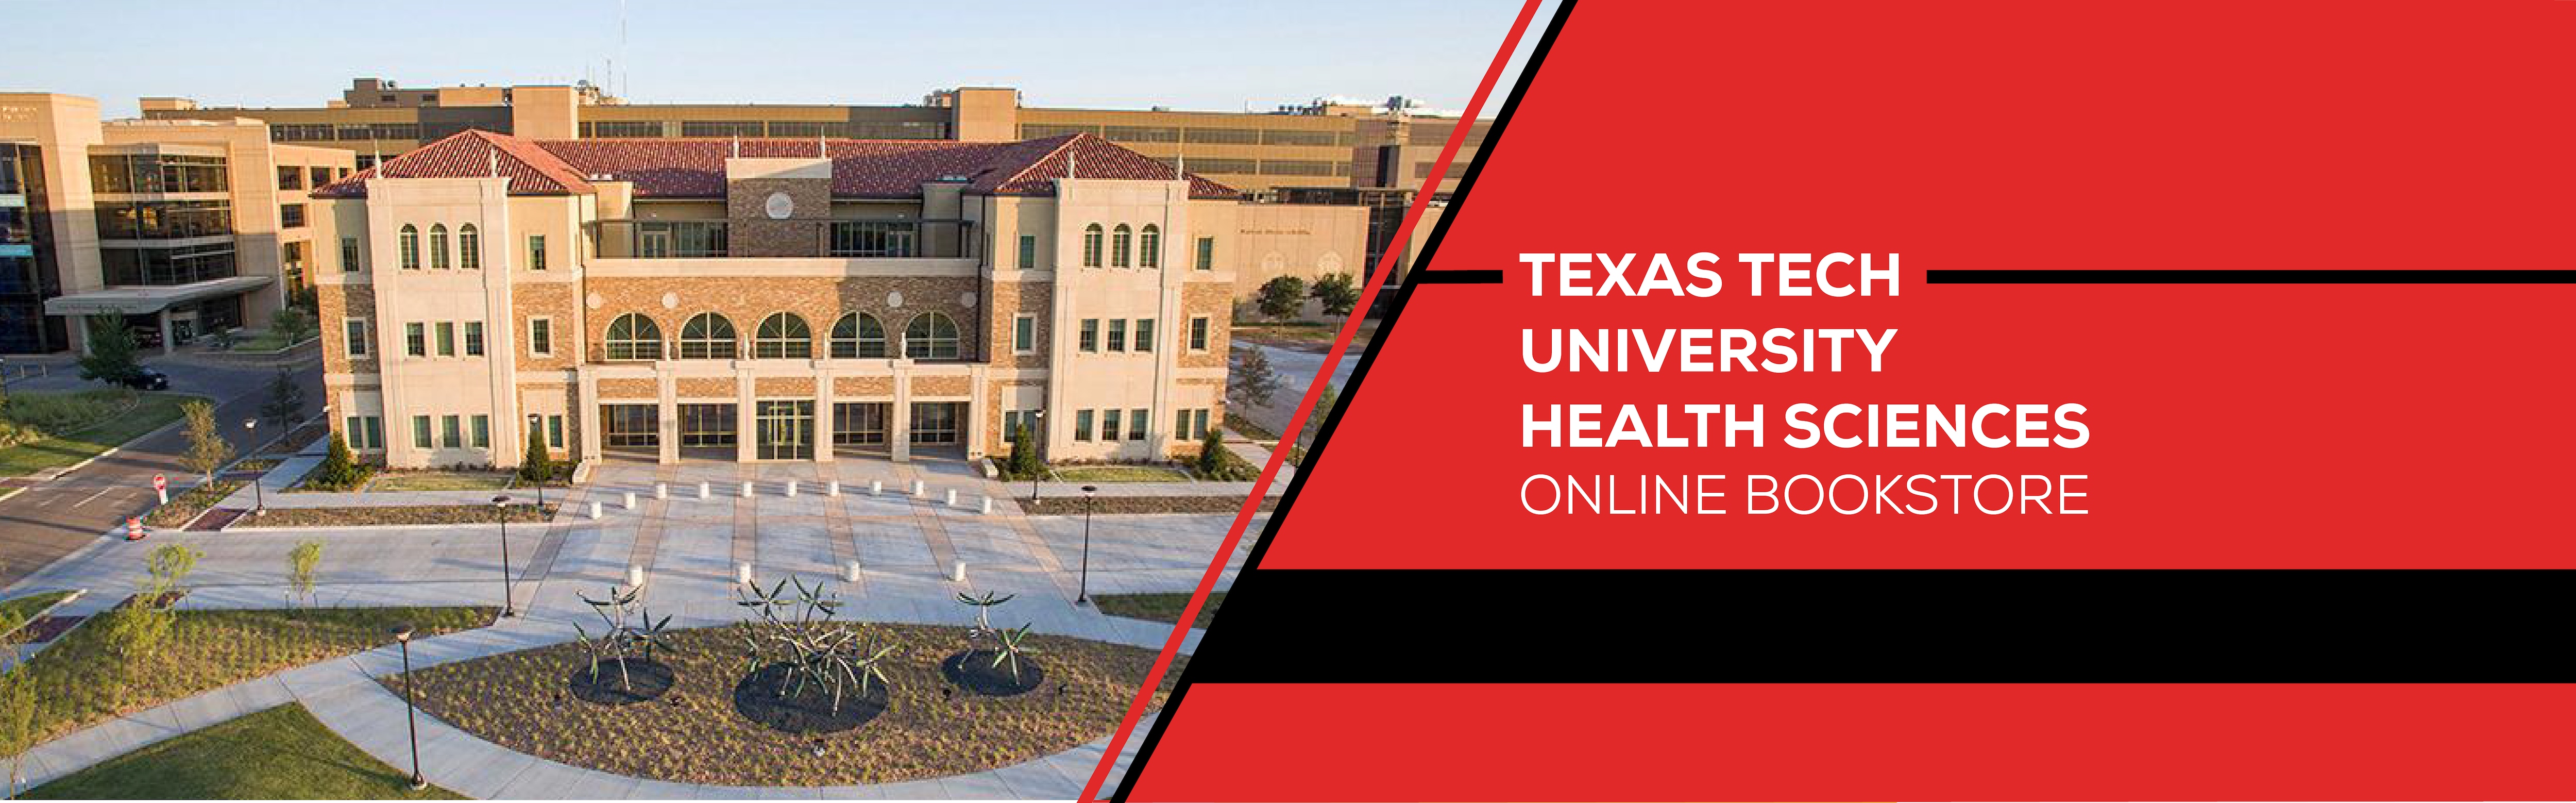 2020 - Recently Added & Removed eBooks - Libraries at Texas Tech University  Health Sciences Center